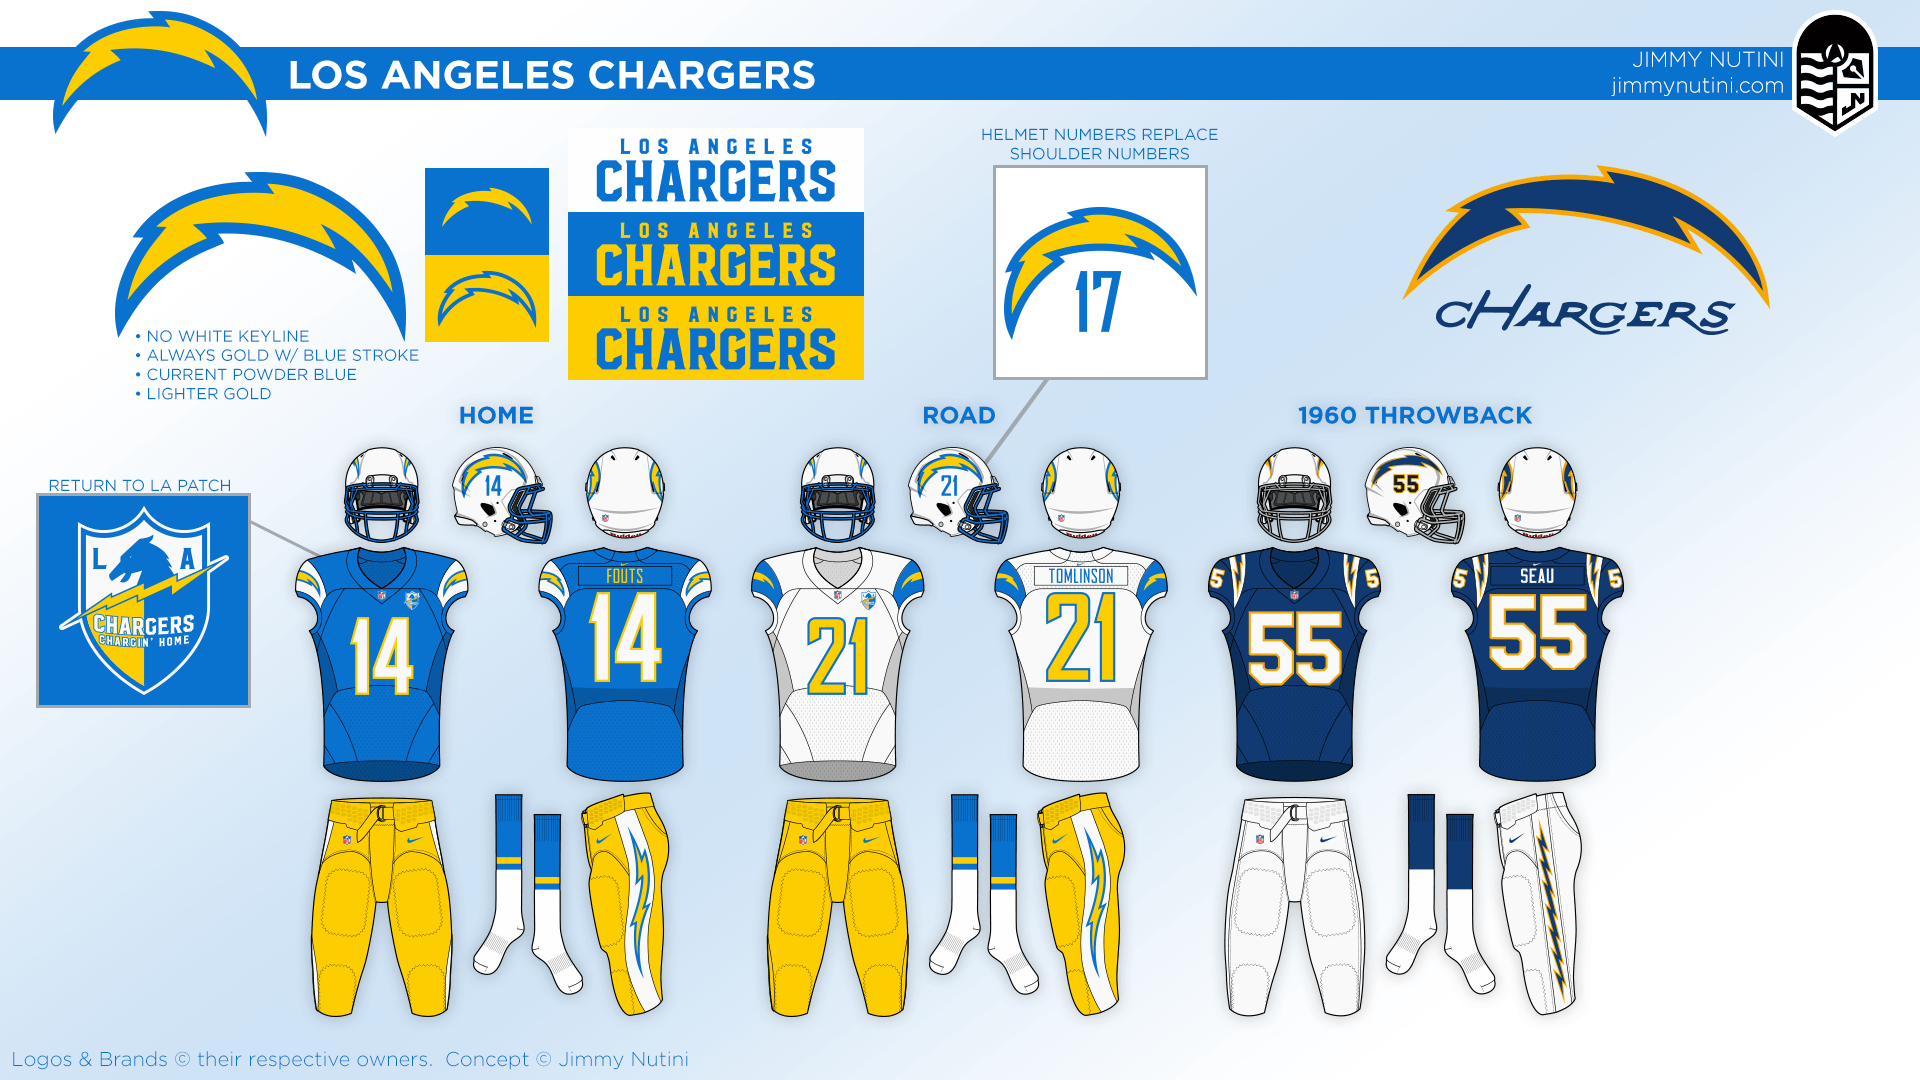 Uni Watch delivers the winning entries in the Chargers redesign contest